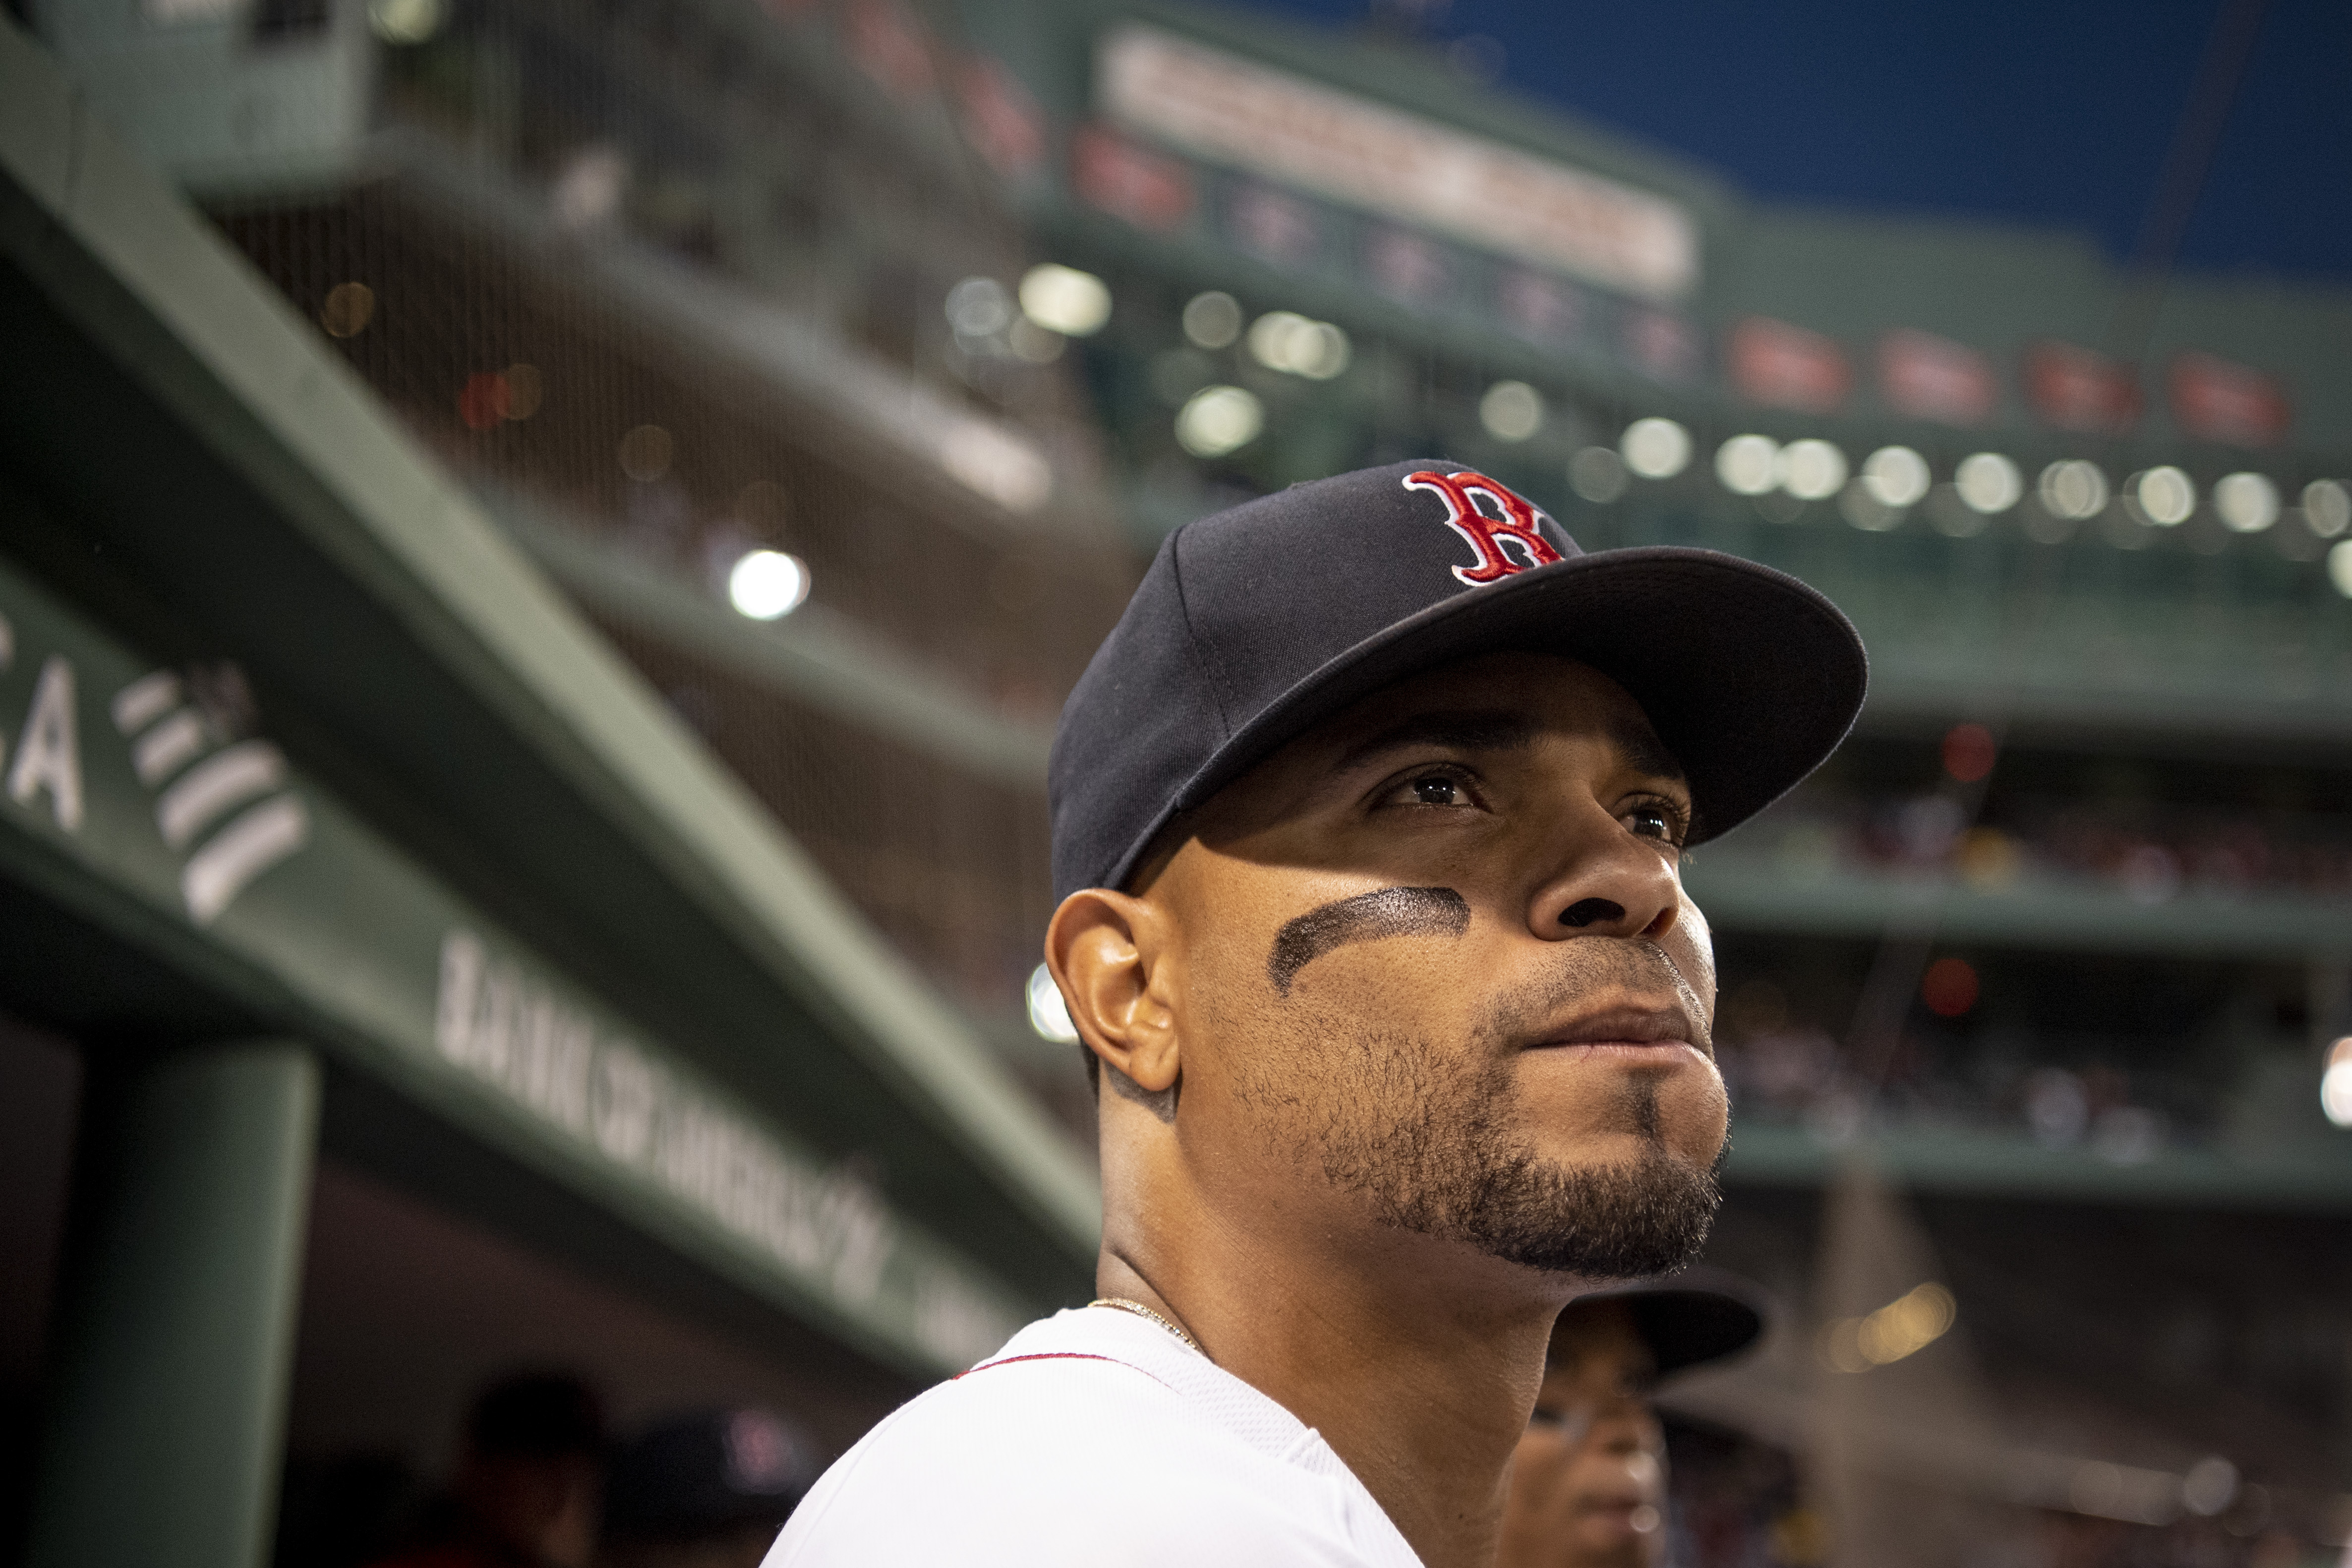 Xander Bogaerts: Padres agree to deal with 5-time All-Star, report says